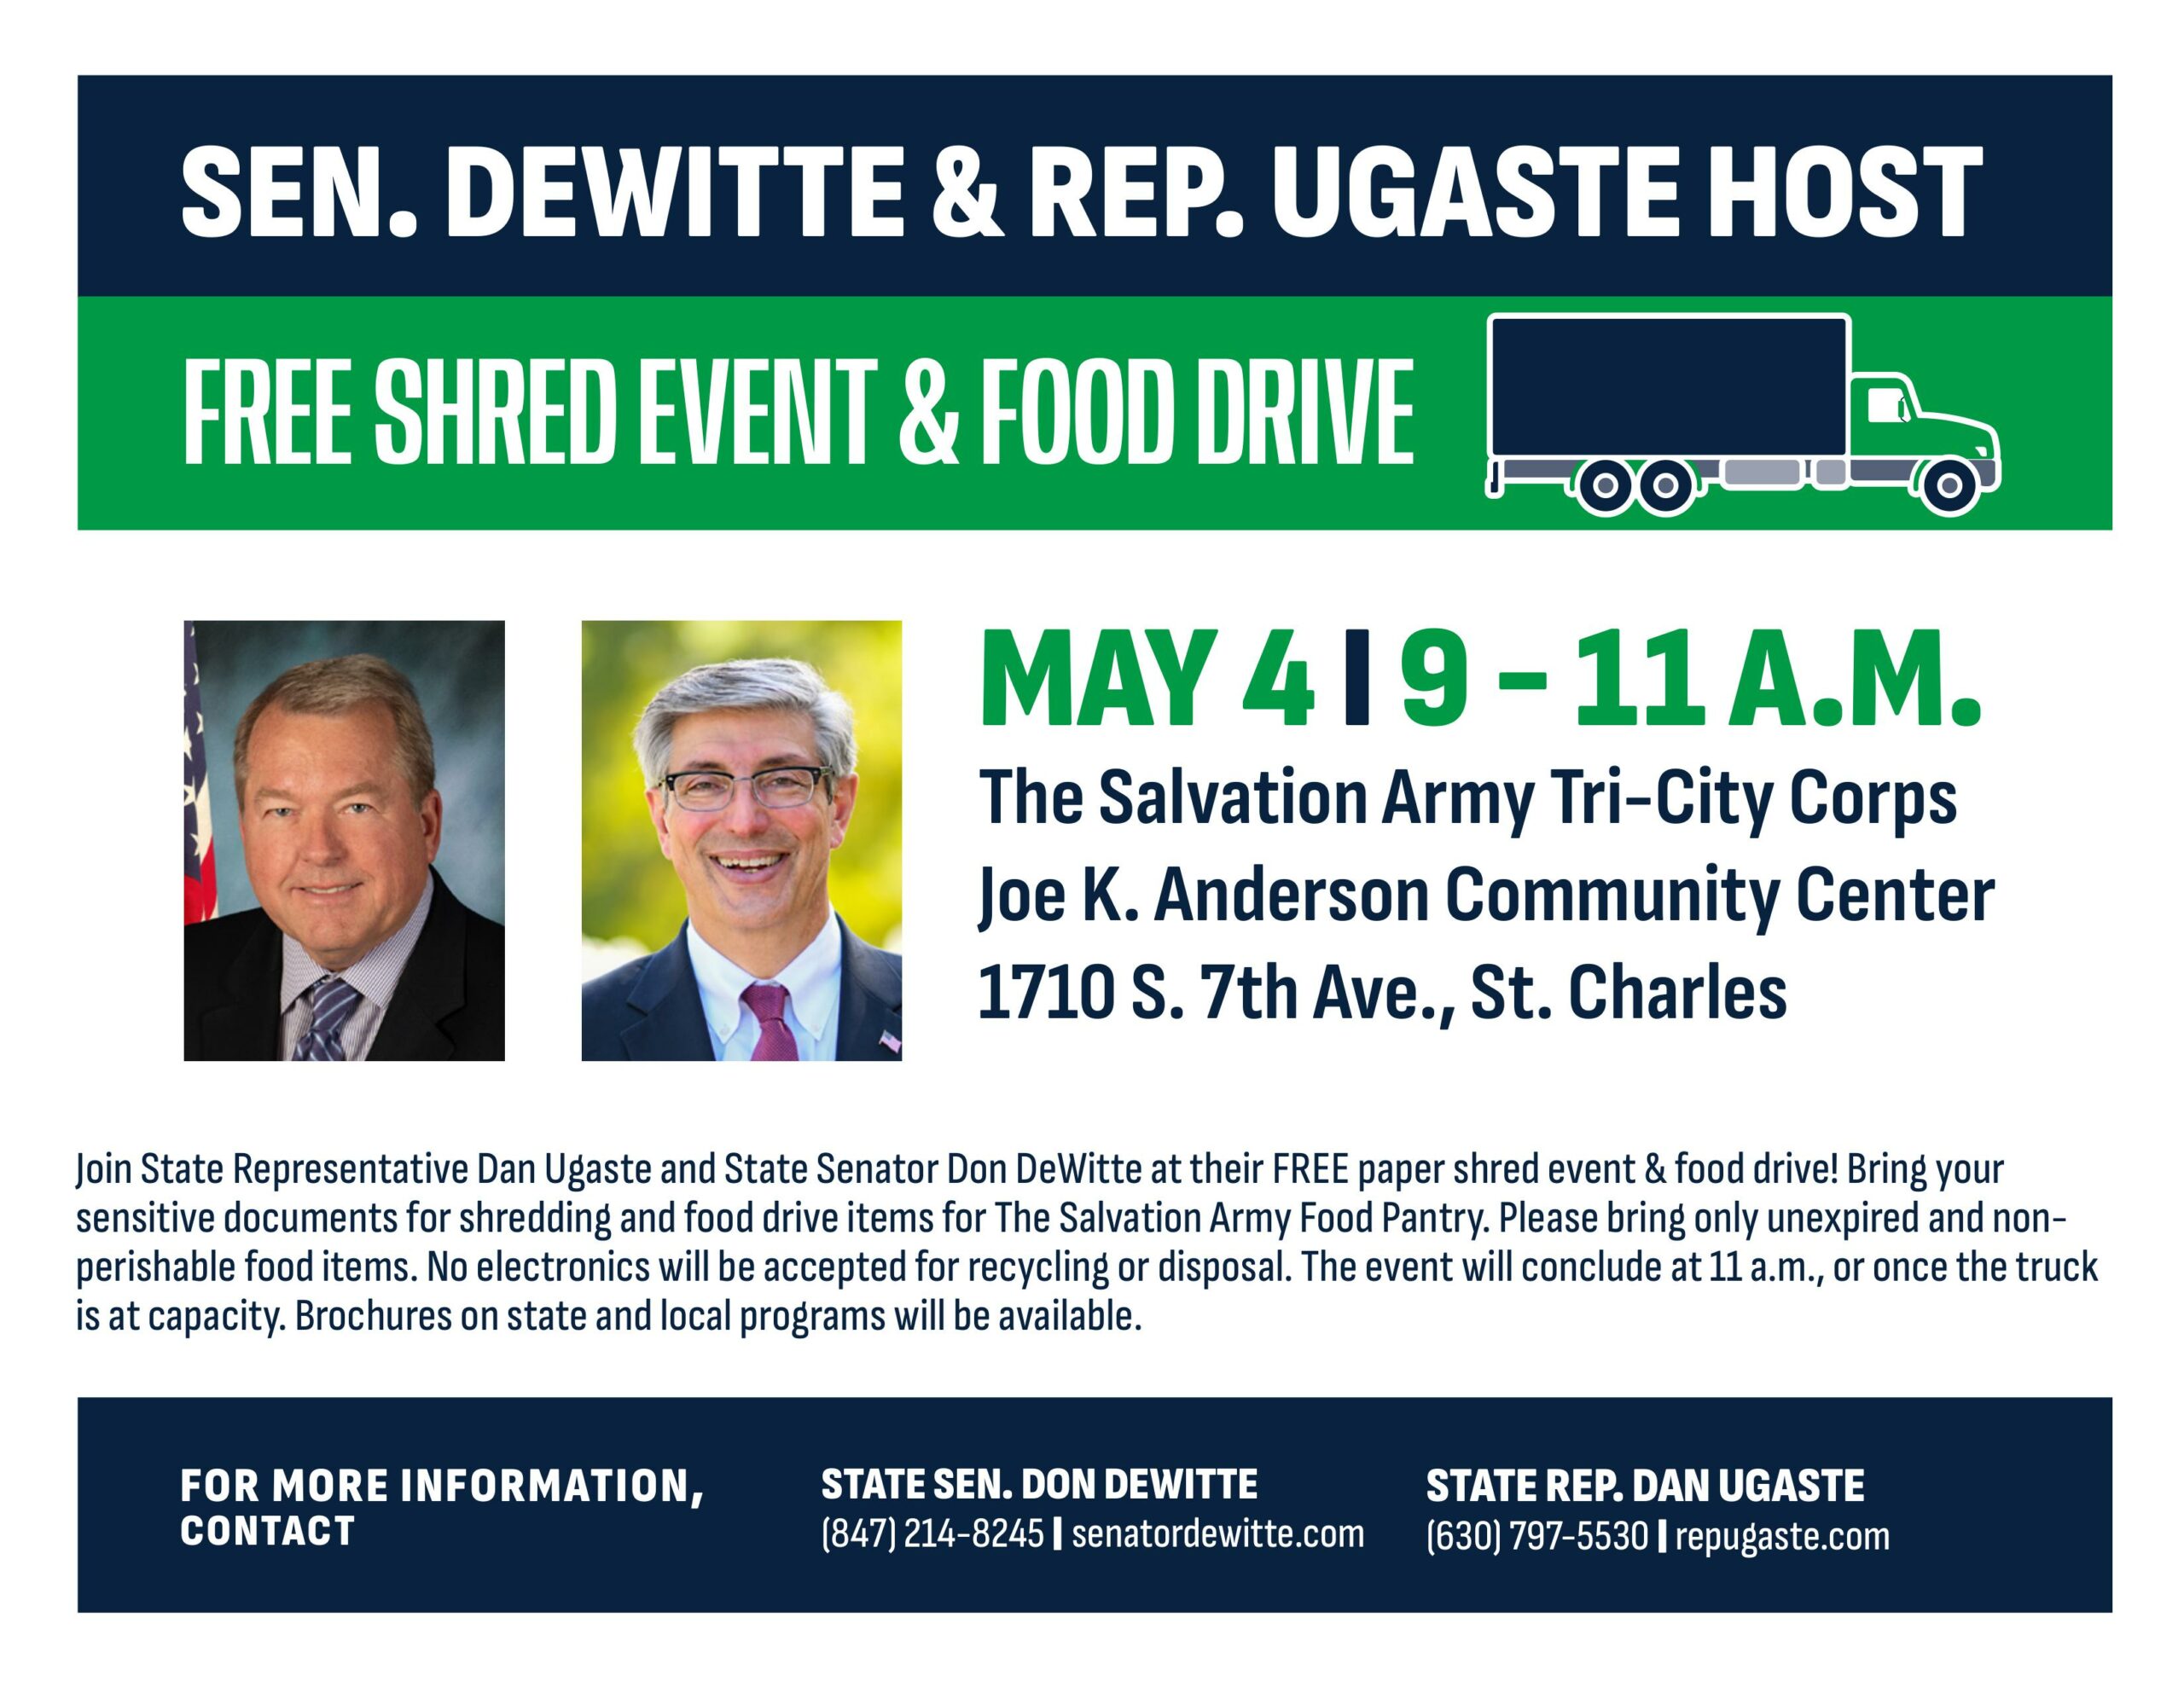 Shred Event and Food Collection Drive